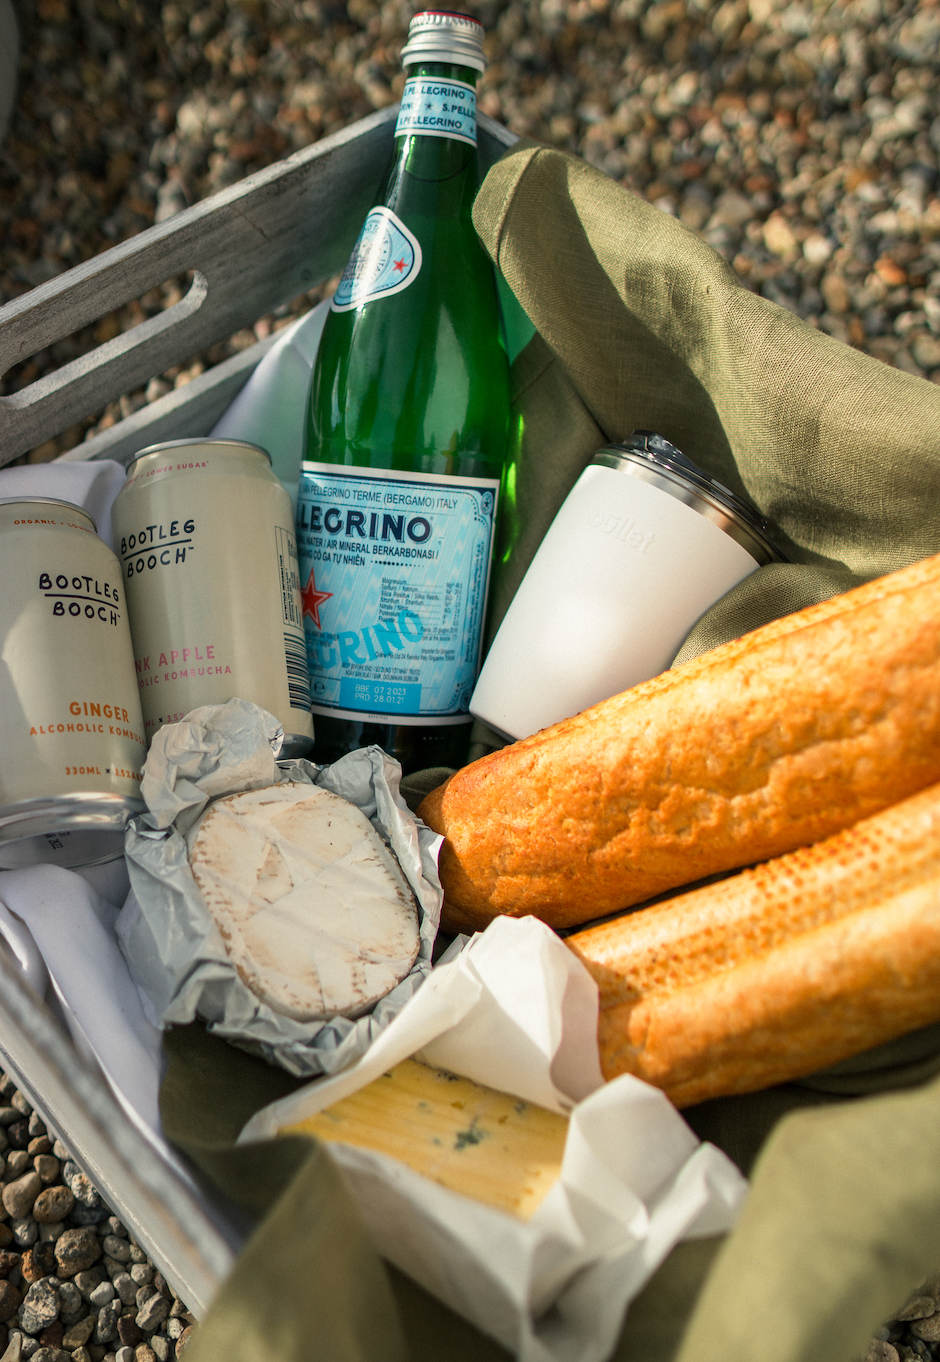 reusable coffee cup amongst picnic food and drink